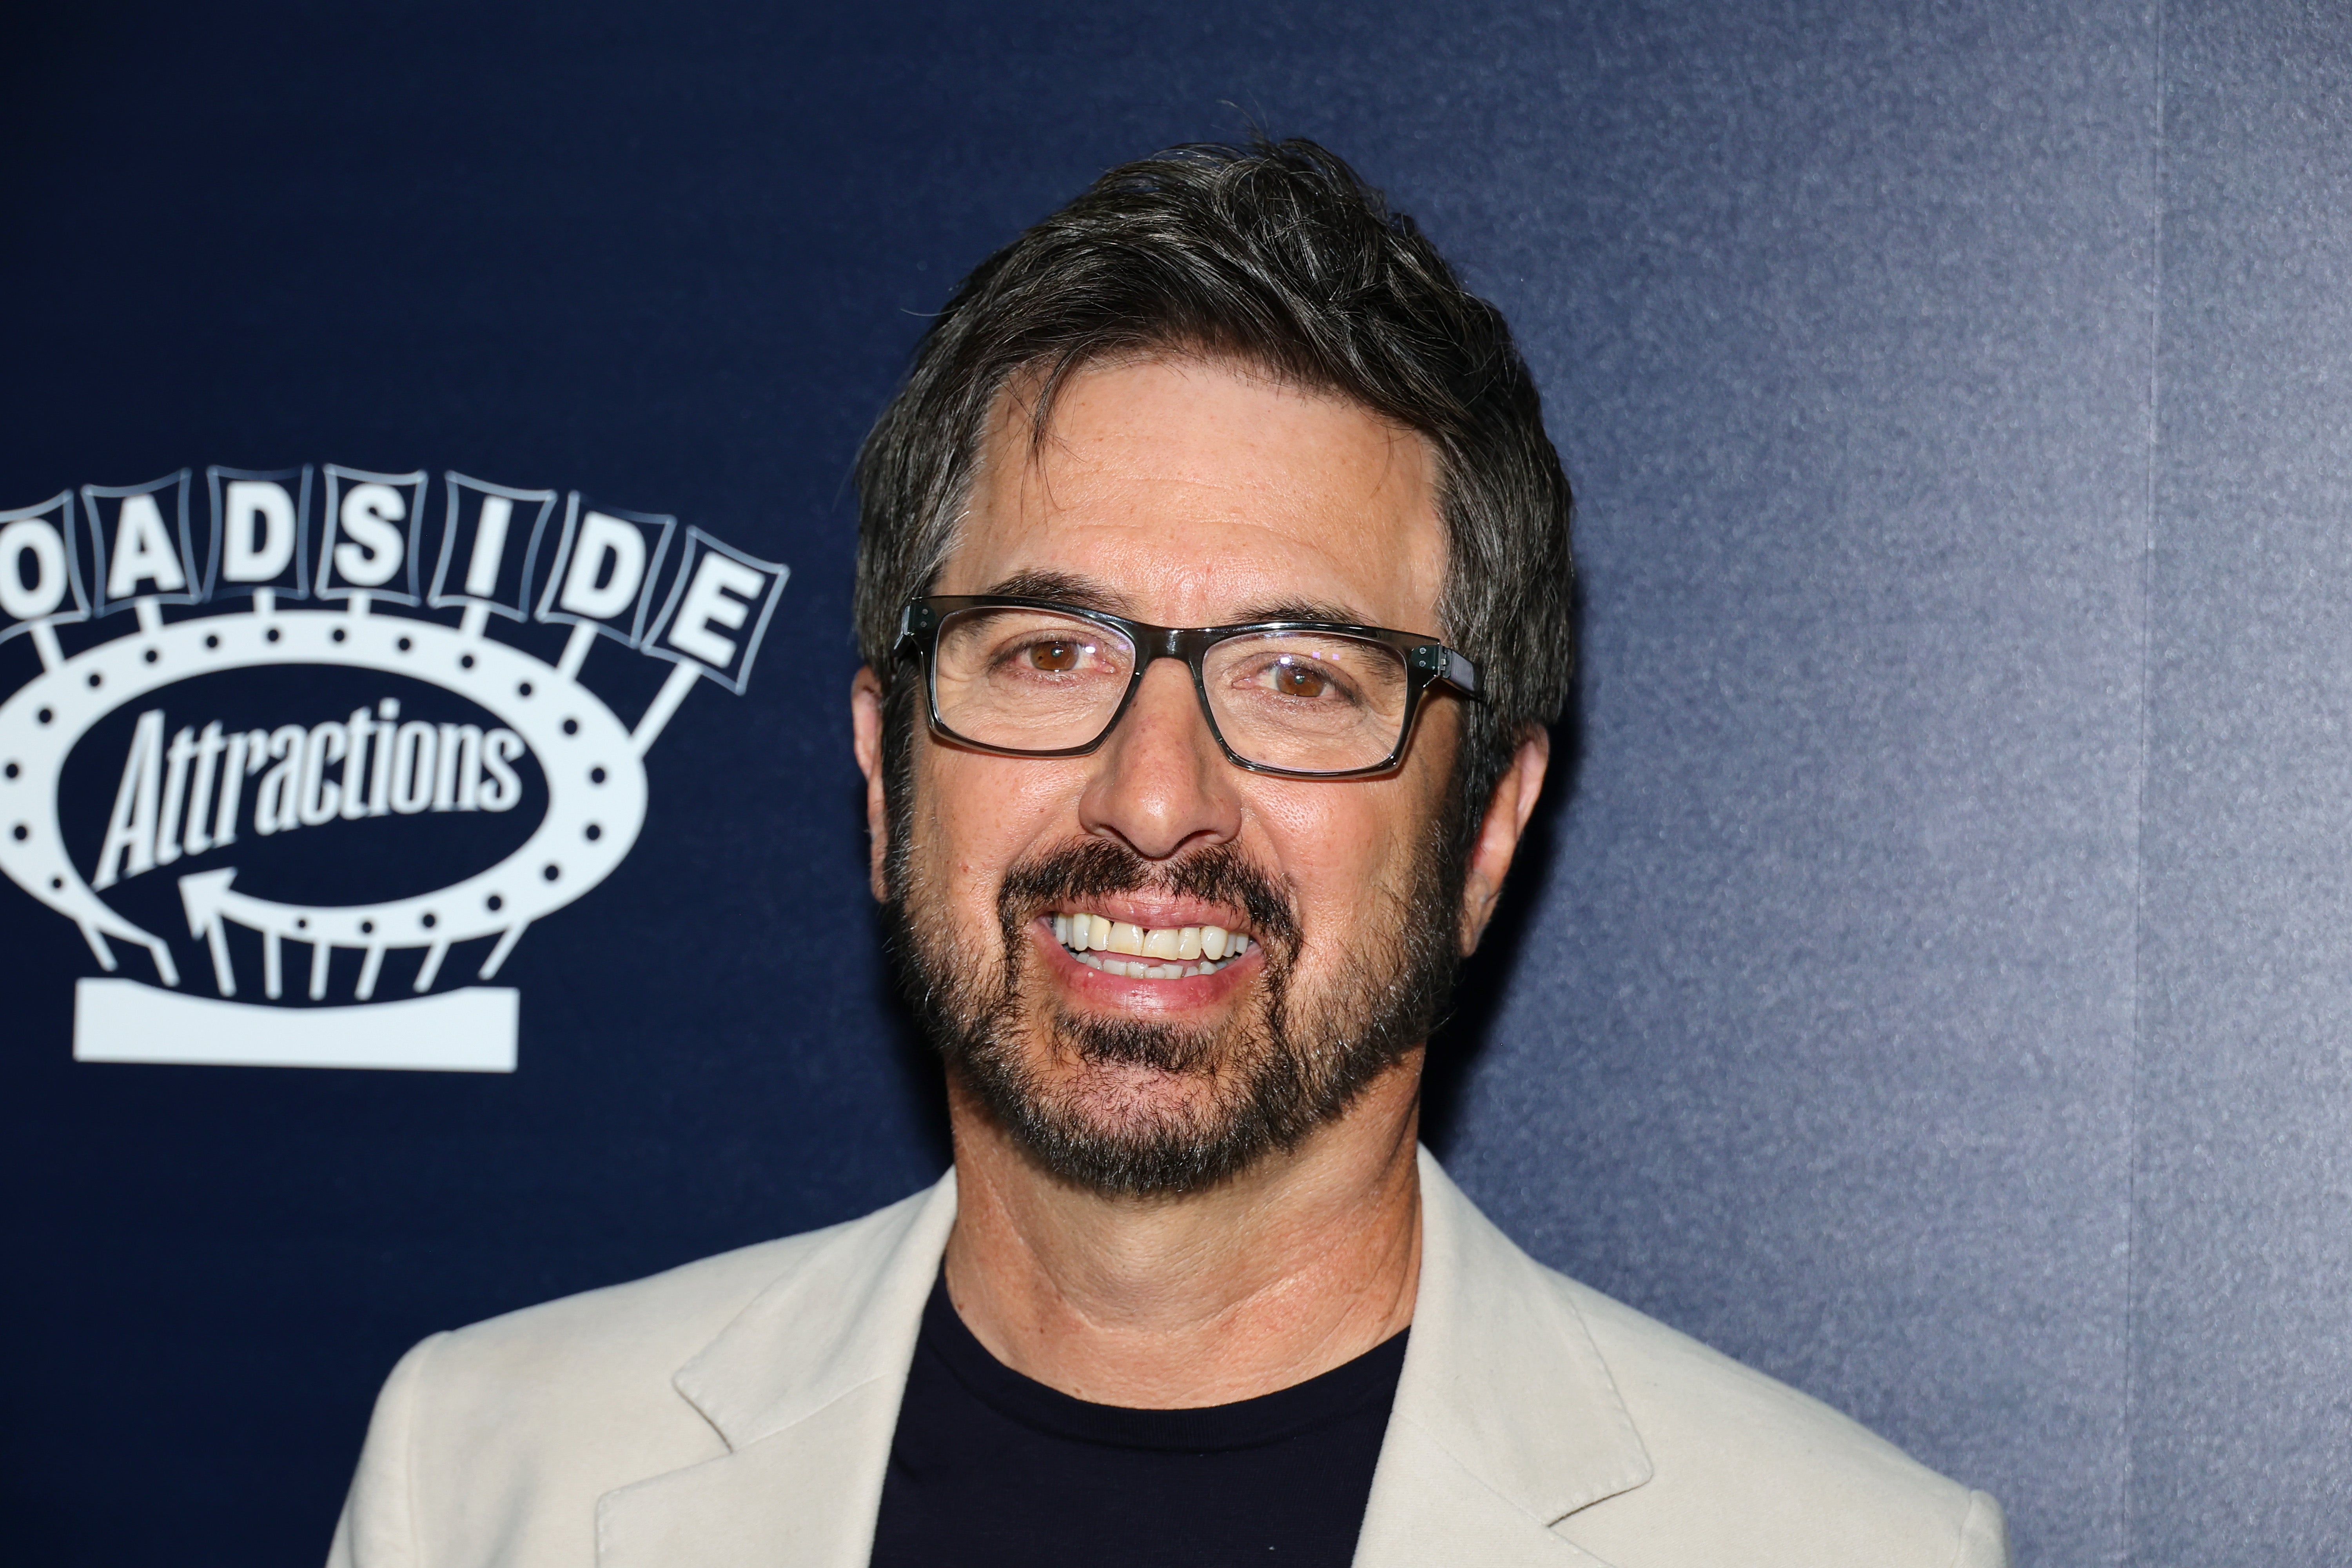 Ray Romano suffered chest pains and anxiety making directorial debut